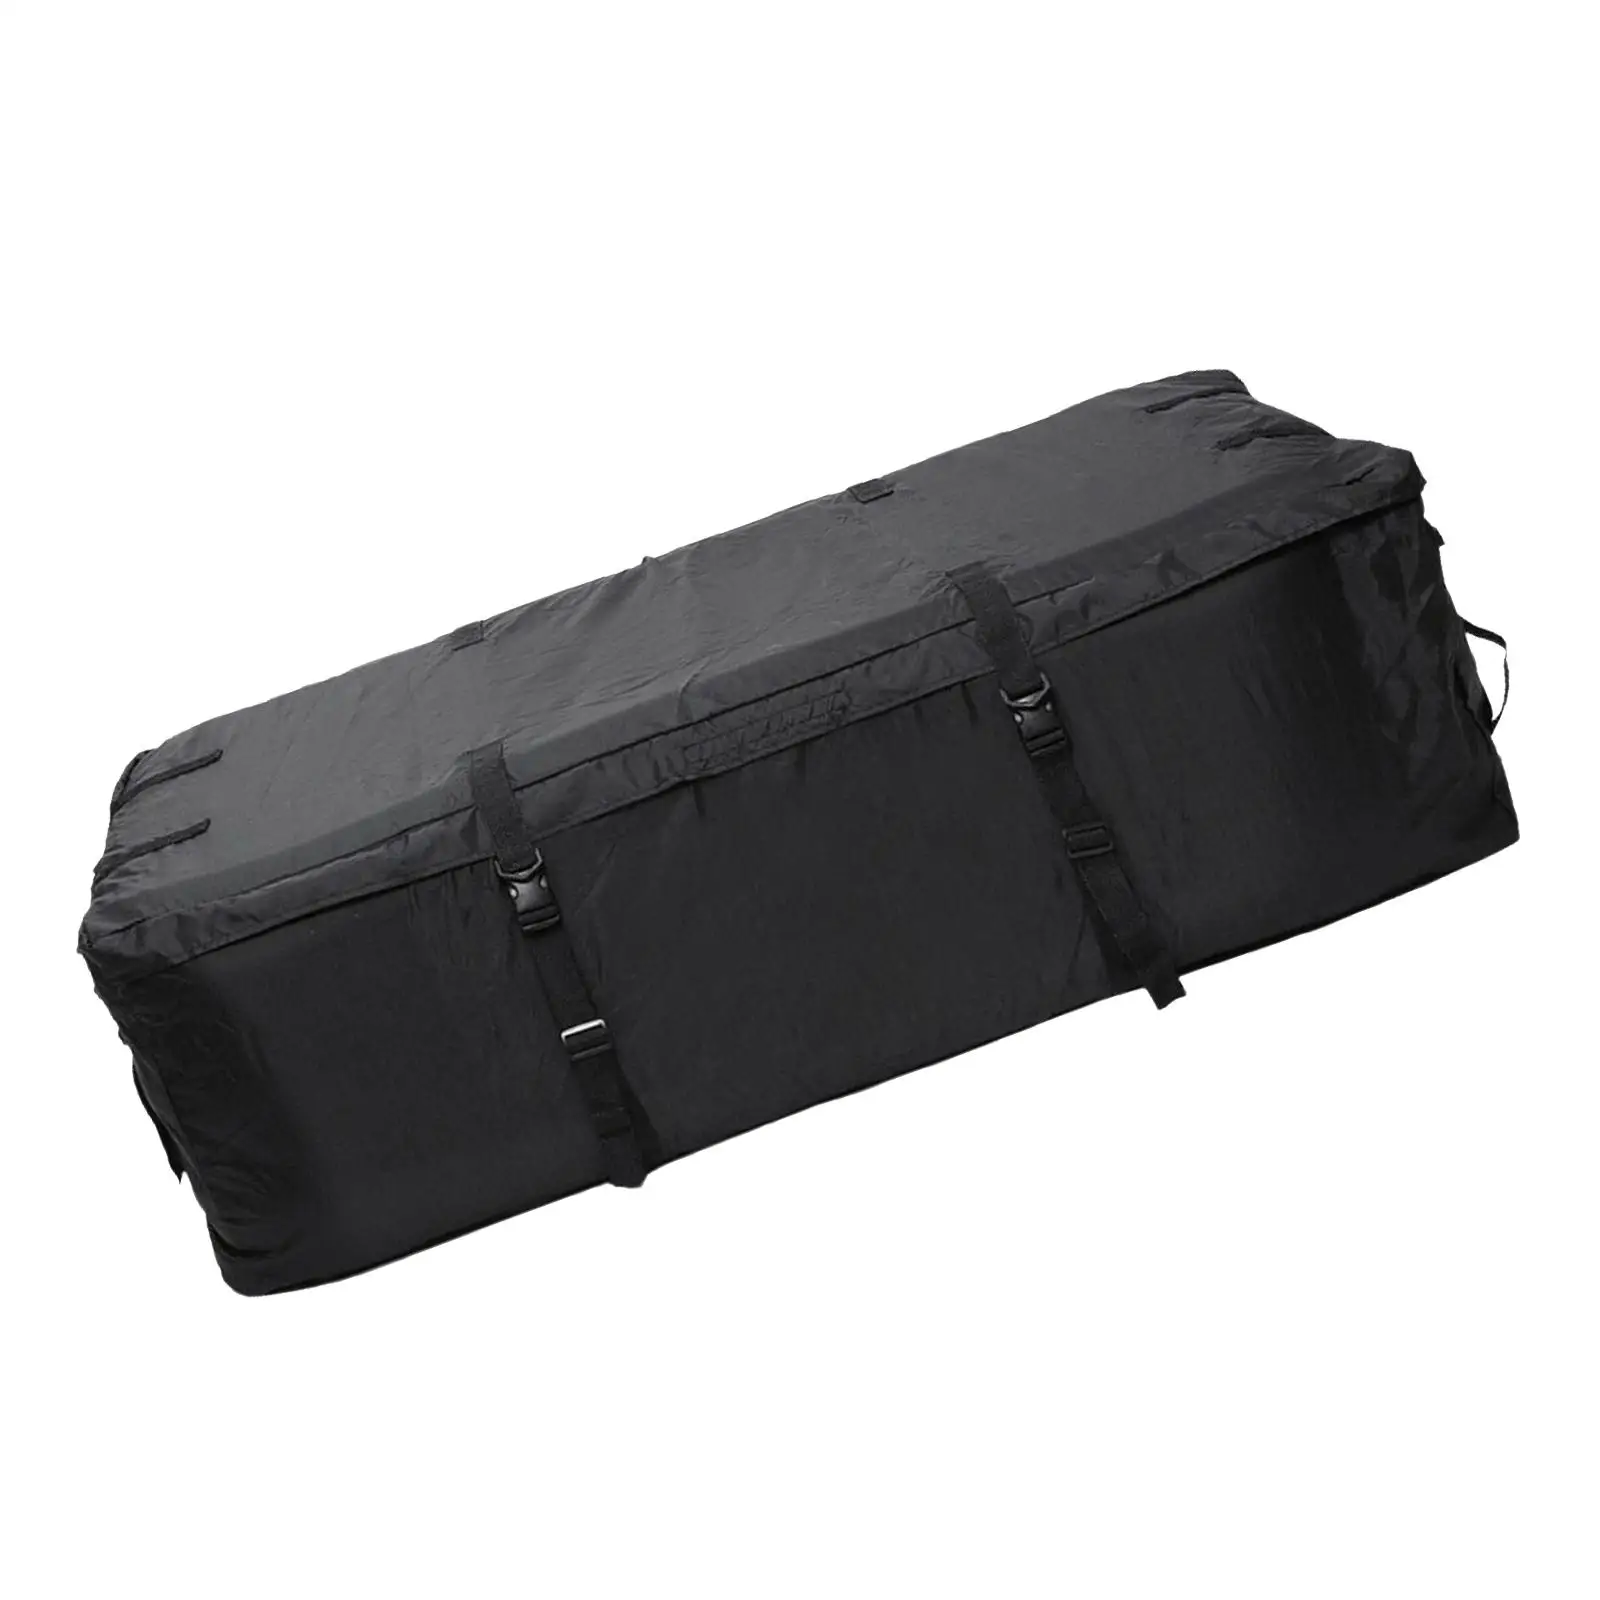 Waterproof Car Roof Top Storage Bag 420D Fit for Vehicle Trips